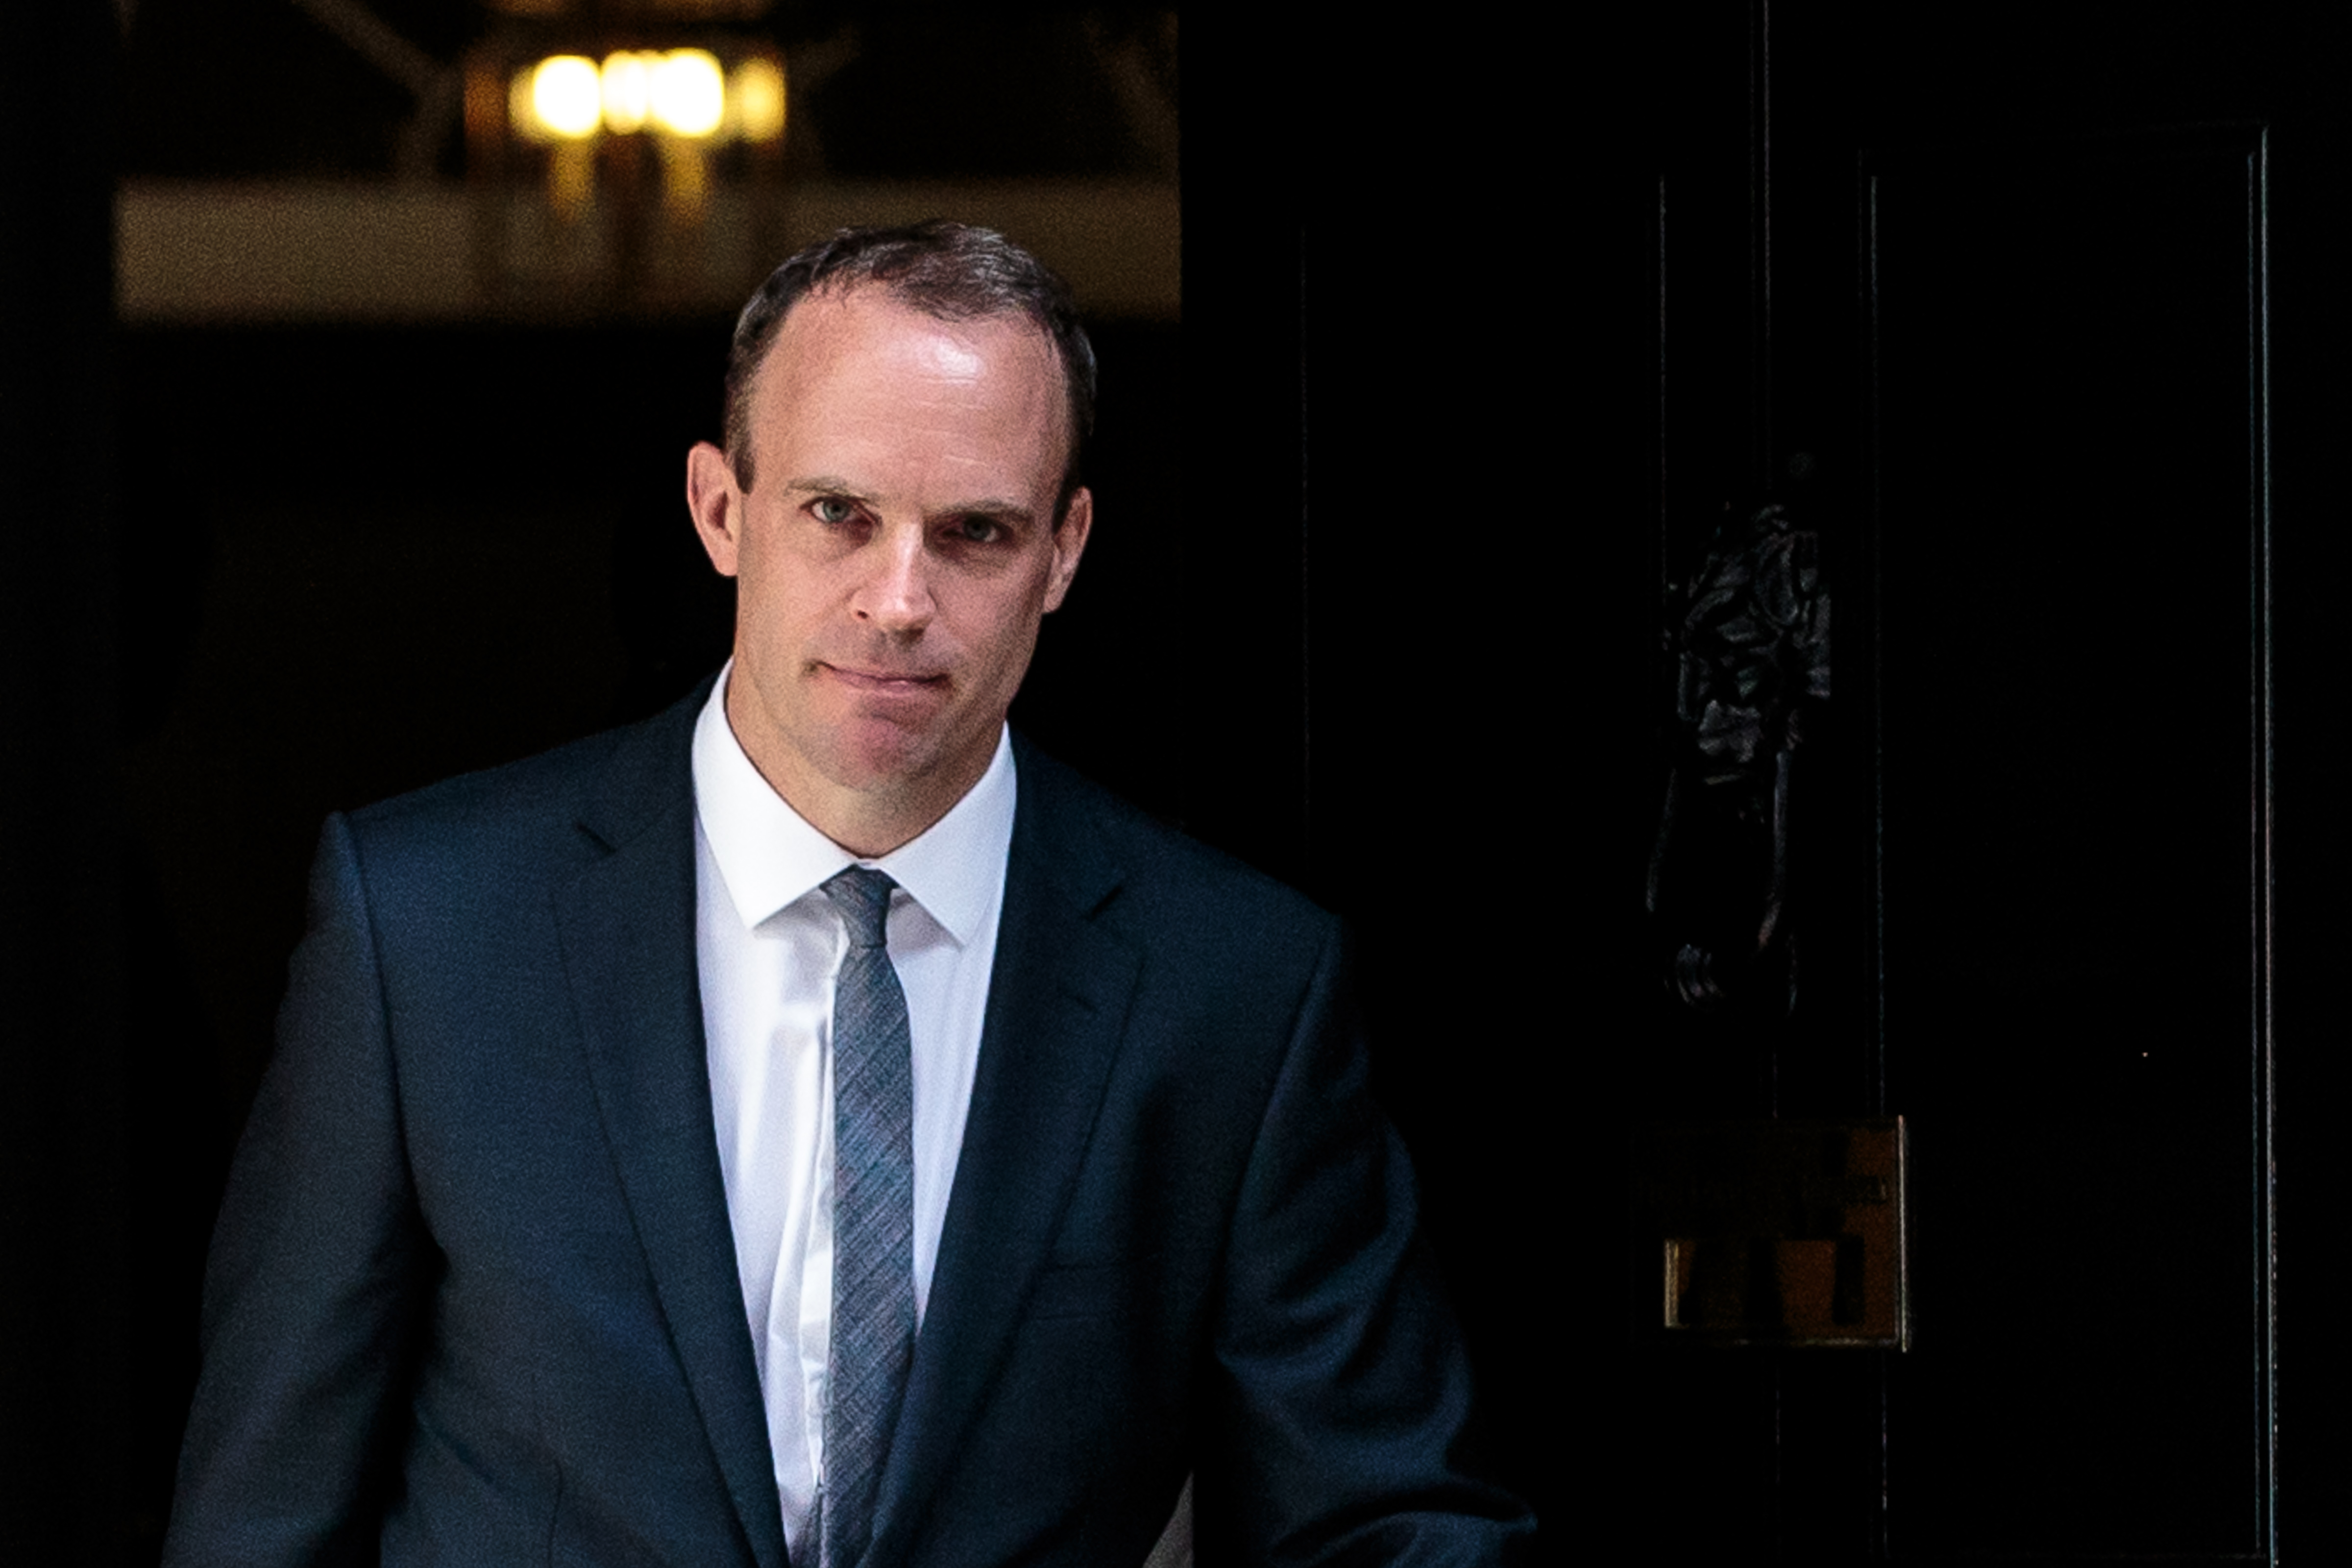 Dominic Raab has resigned as Brexit Minister hours before Theresa May is due to defend her plans in Parliament.